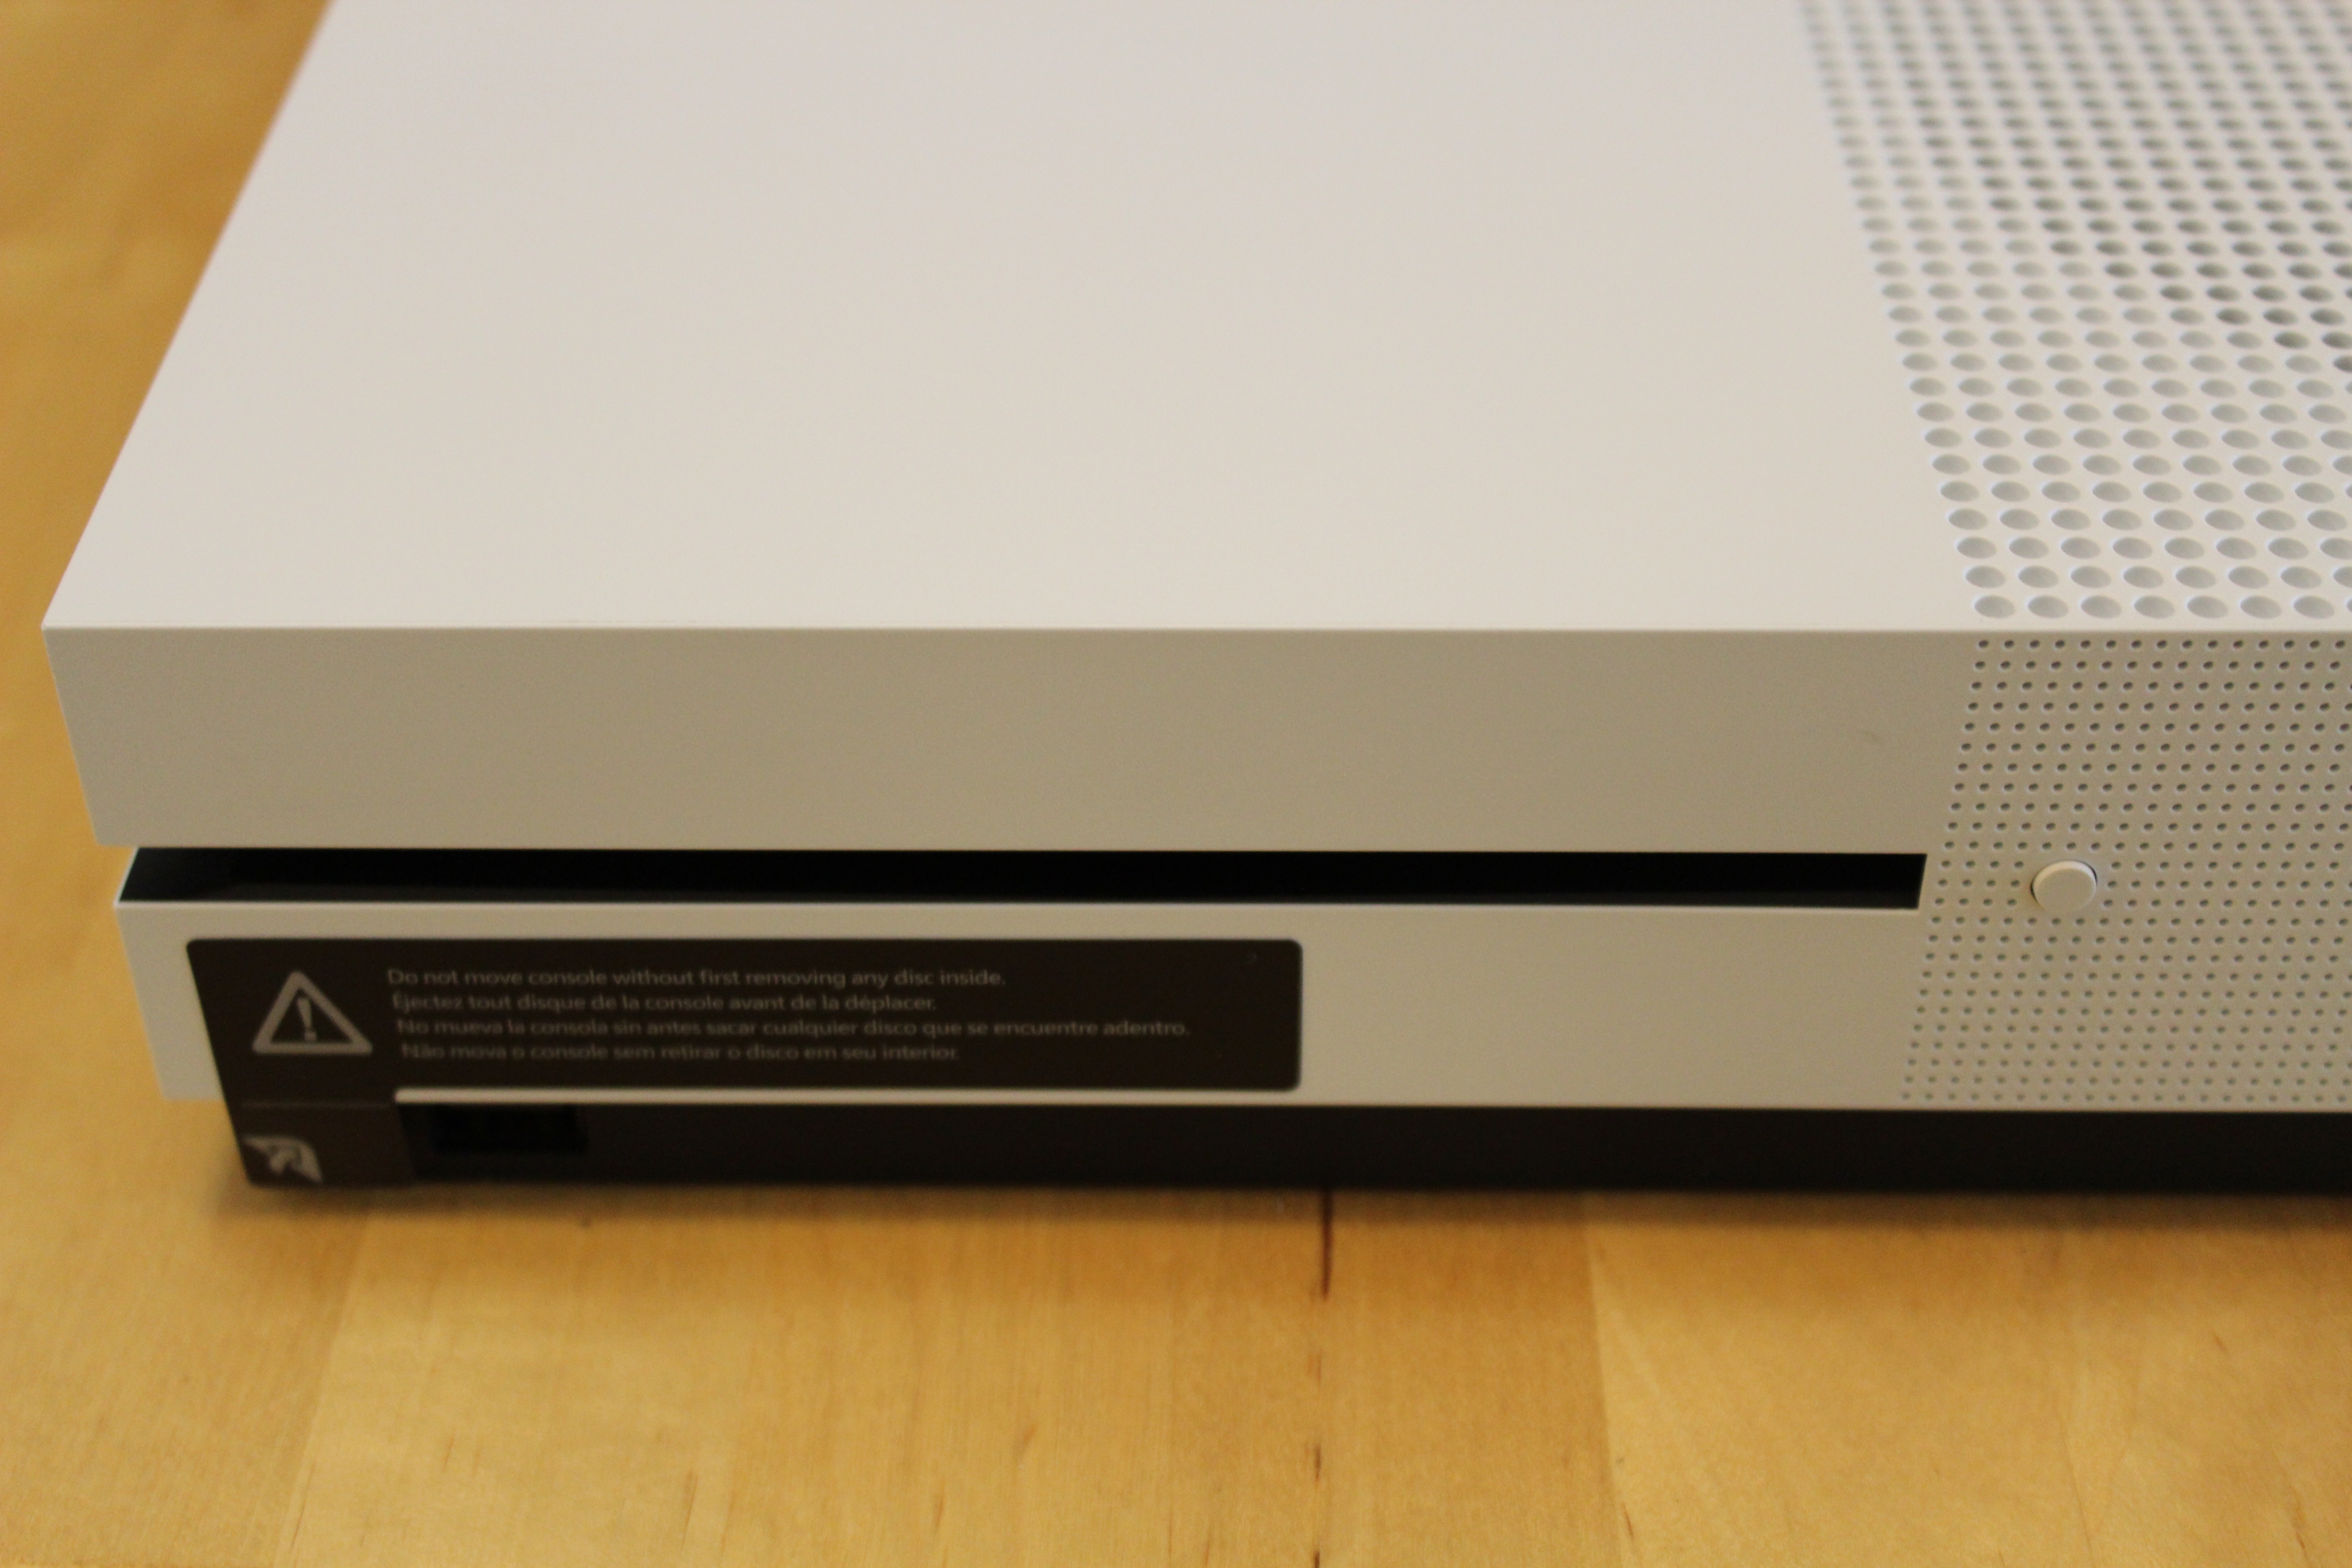 disc drive for xbox one s